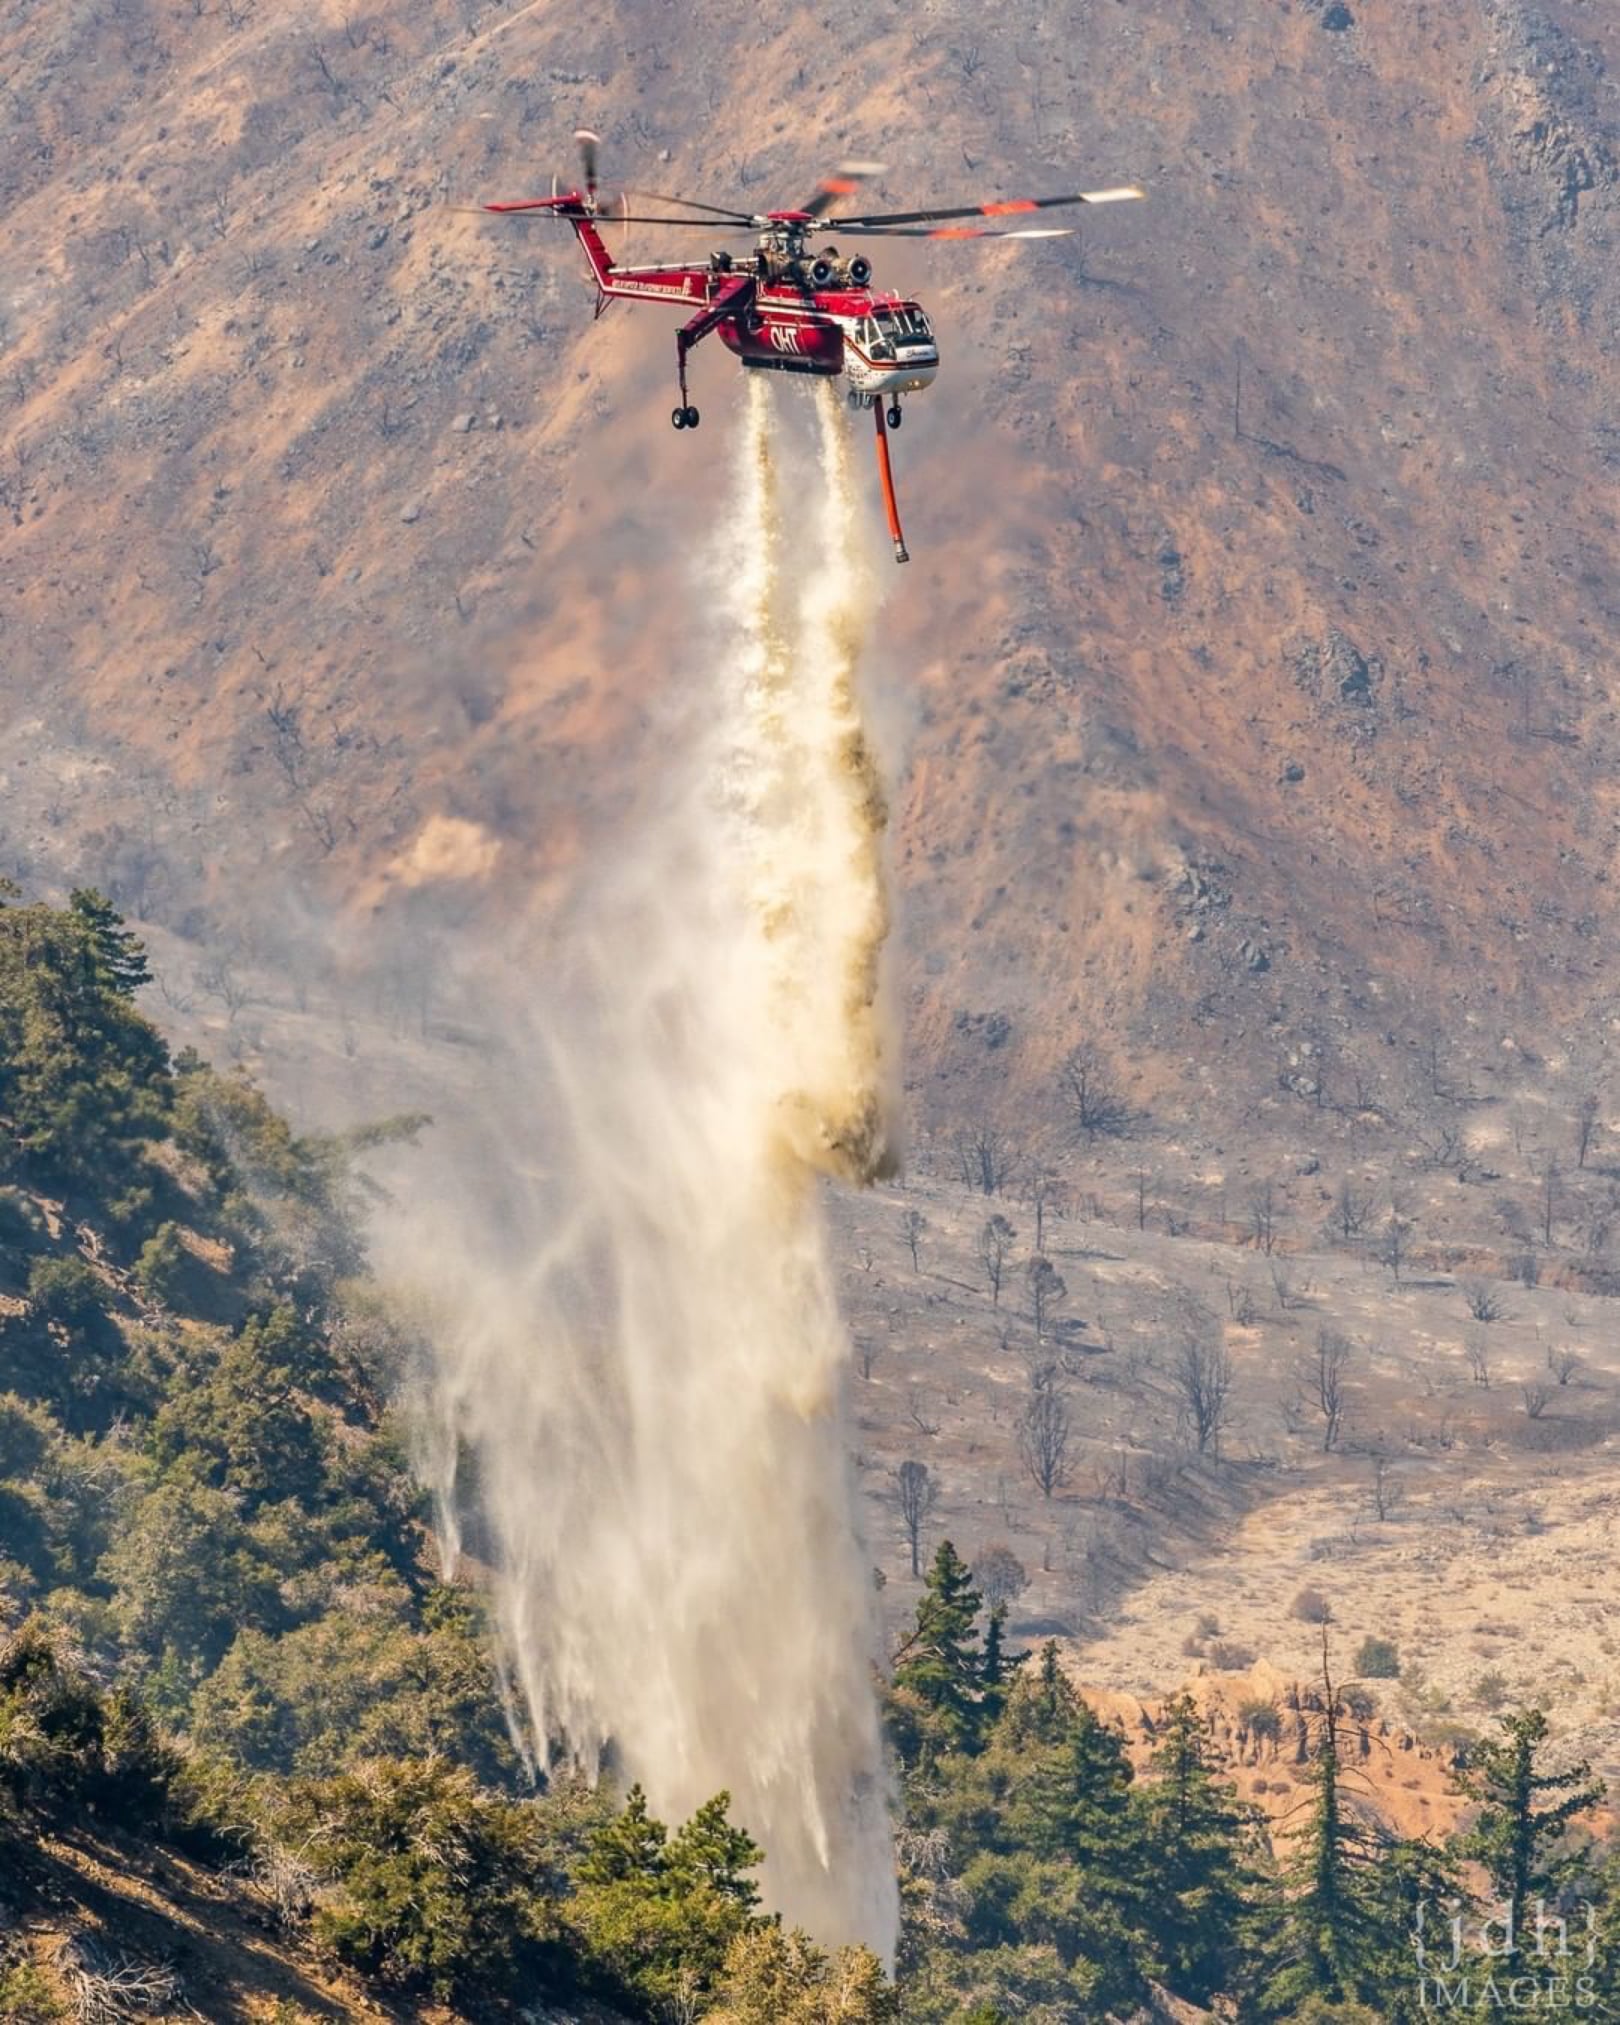 A Sikorsky CH-54B from Helicopter Transport Services douses a hotspot on the Bobcat Fire in California. Photo submitted by Instagram user @jdhimg using #verticalmag